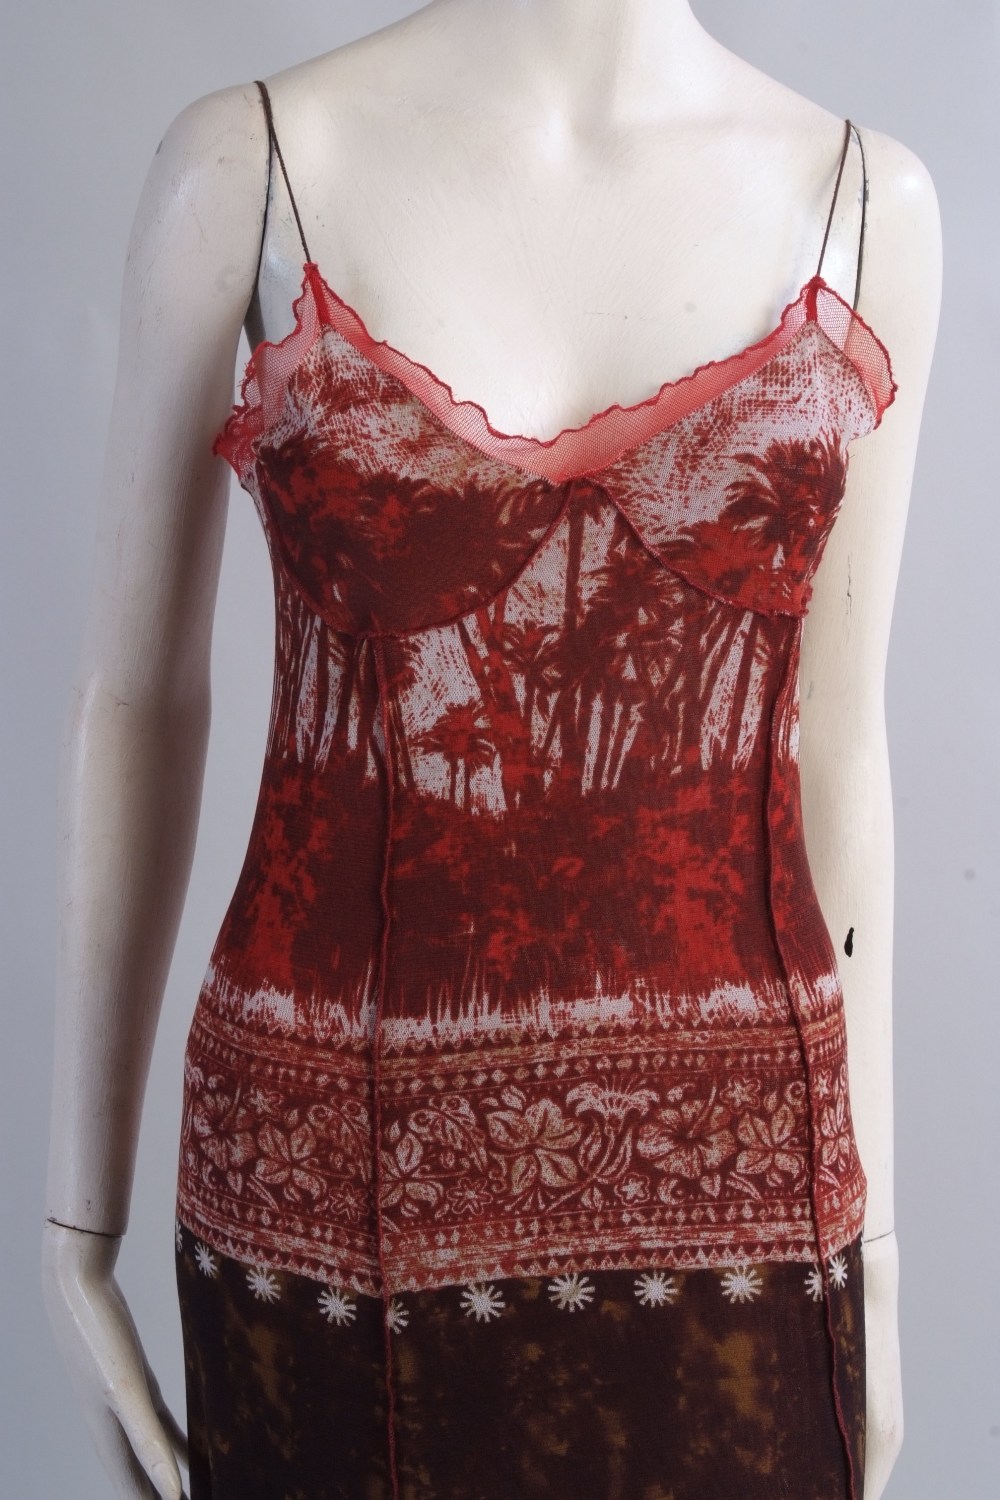 A 'Jean Paul Gaultier' Hiva Or mesh dres - Image 2 of 6